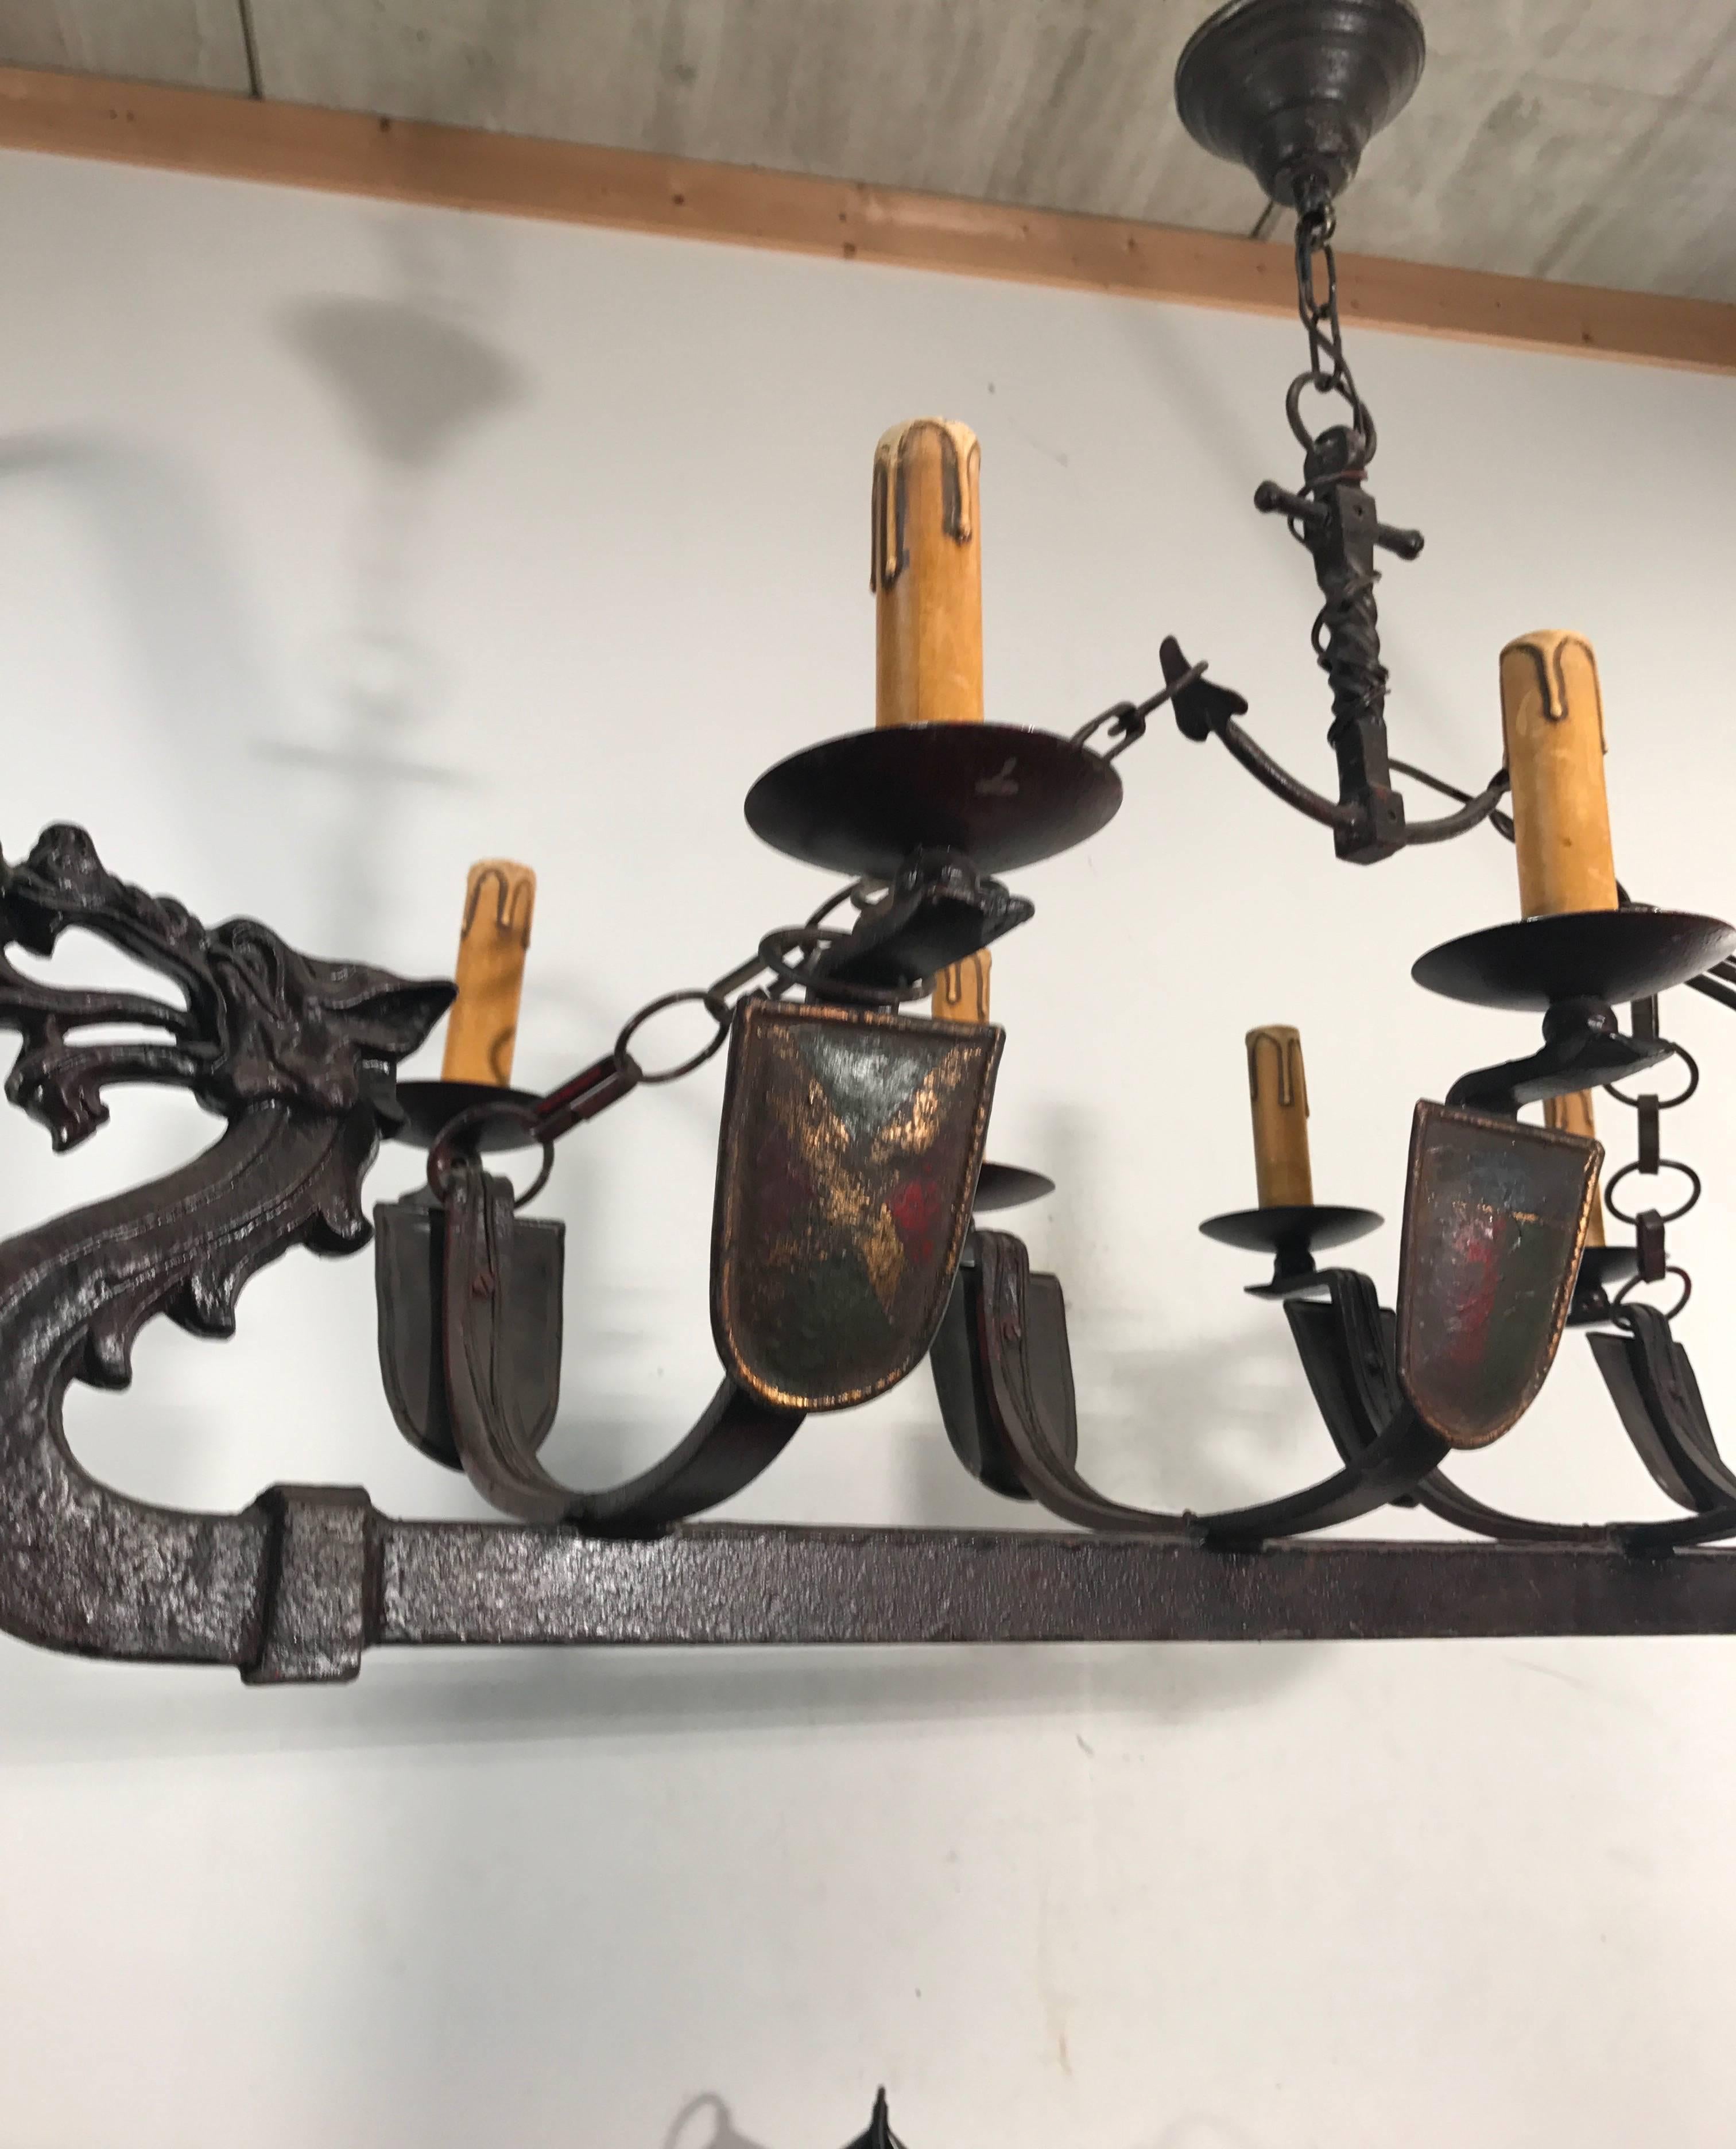 20th Century Wrought Iron Medieval St. Viking Longboat Chandelier, Pendant Light with Dragons